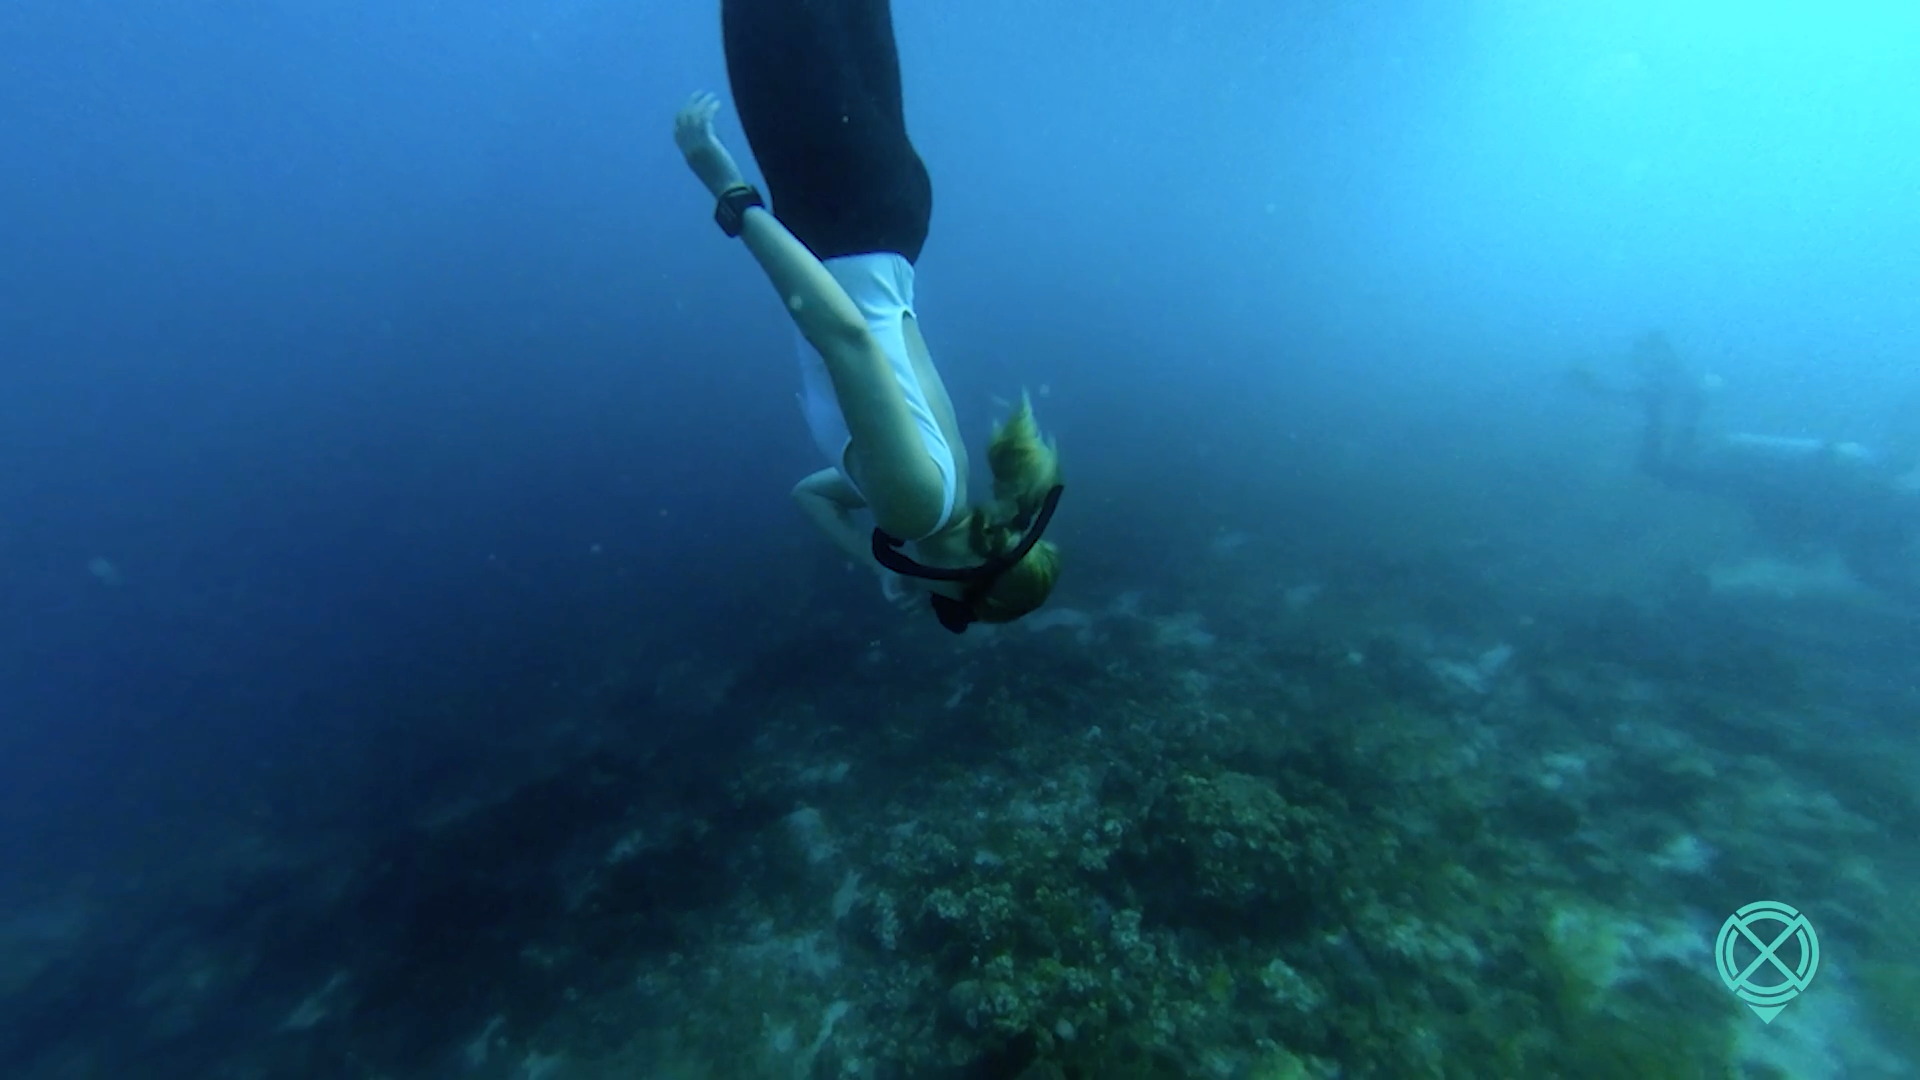 Junette freediving on her days off in the ocean 30 minutes from her home.